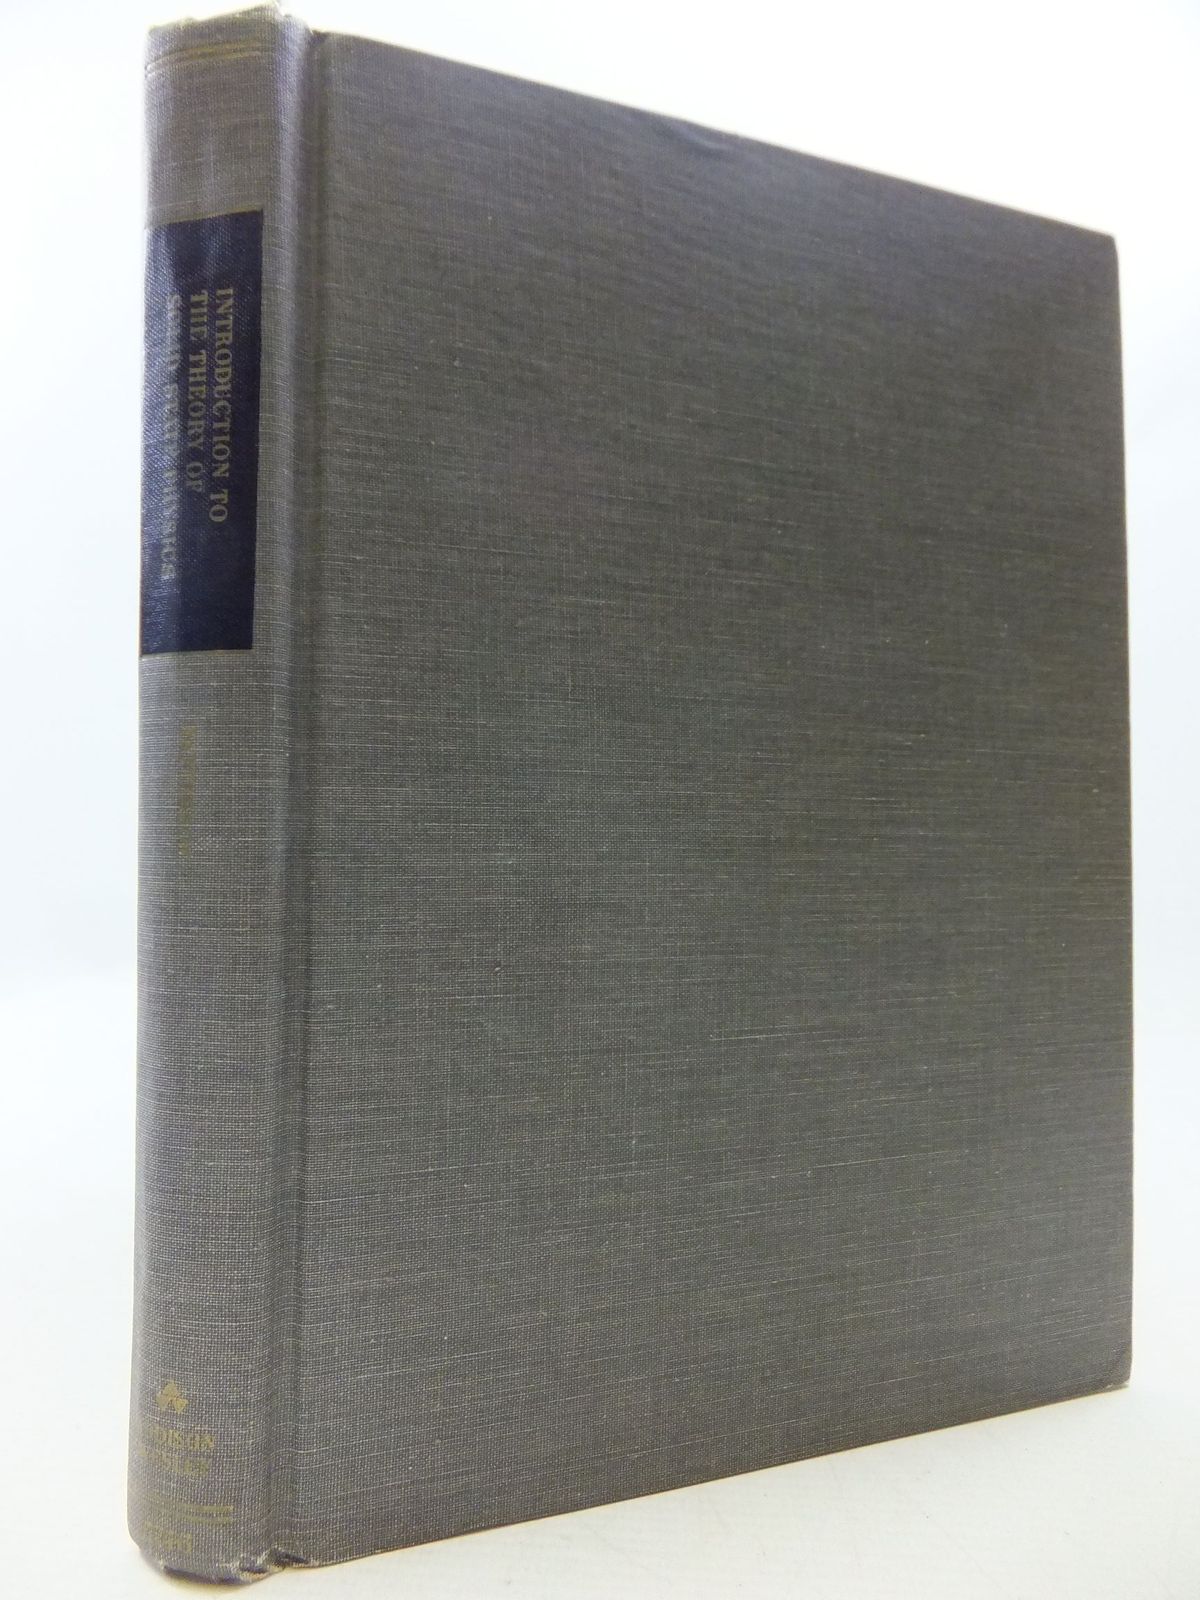 Photo of INTRODUCTION TO THE THEORY OF SOLID STATE PHYSICS written by Patterson, James D. published by Addison-Wesley (STOCK CODE: 1709328)  for sale by Stella & Rose's Books